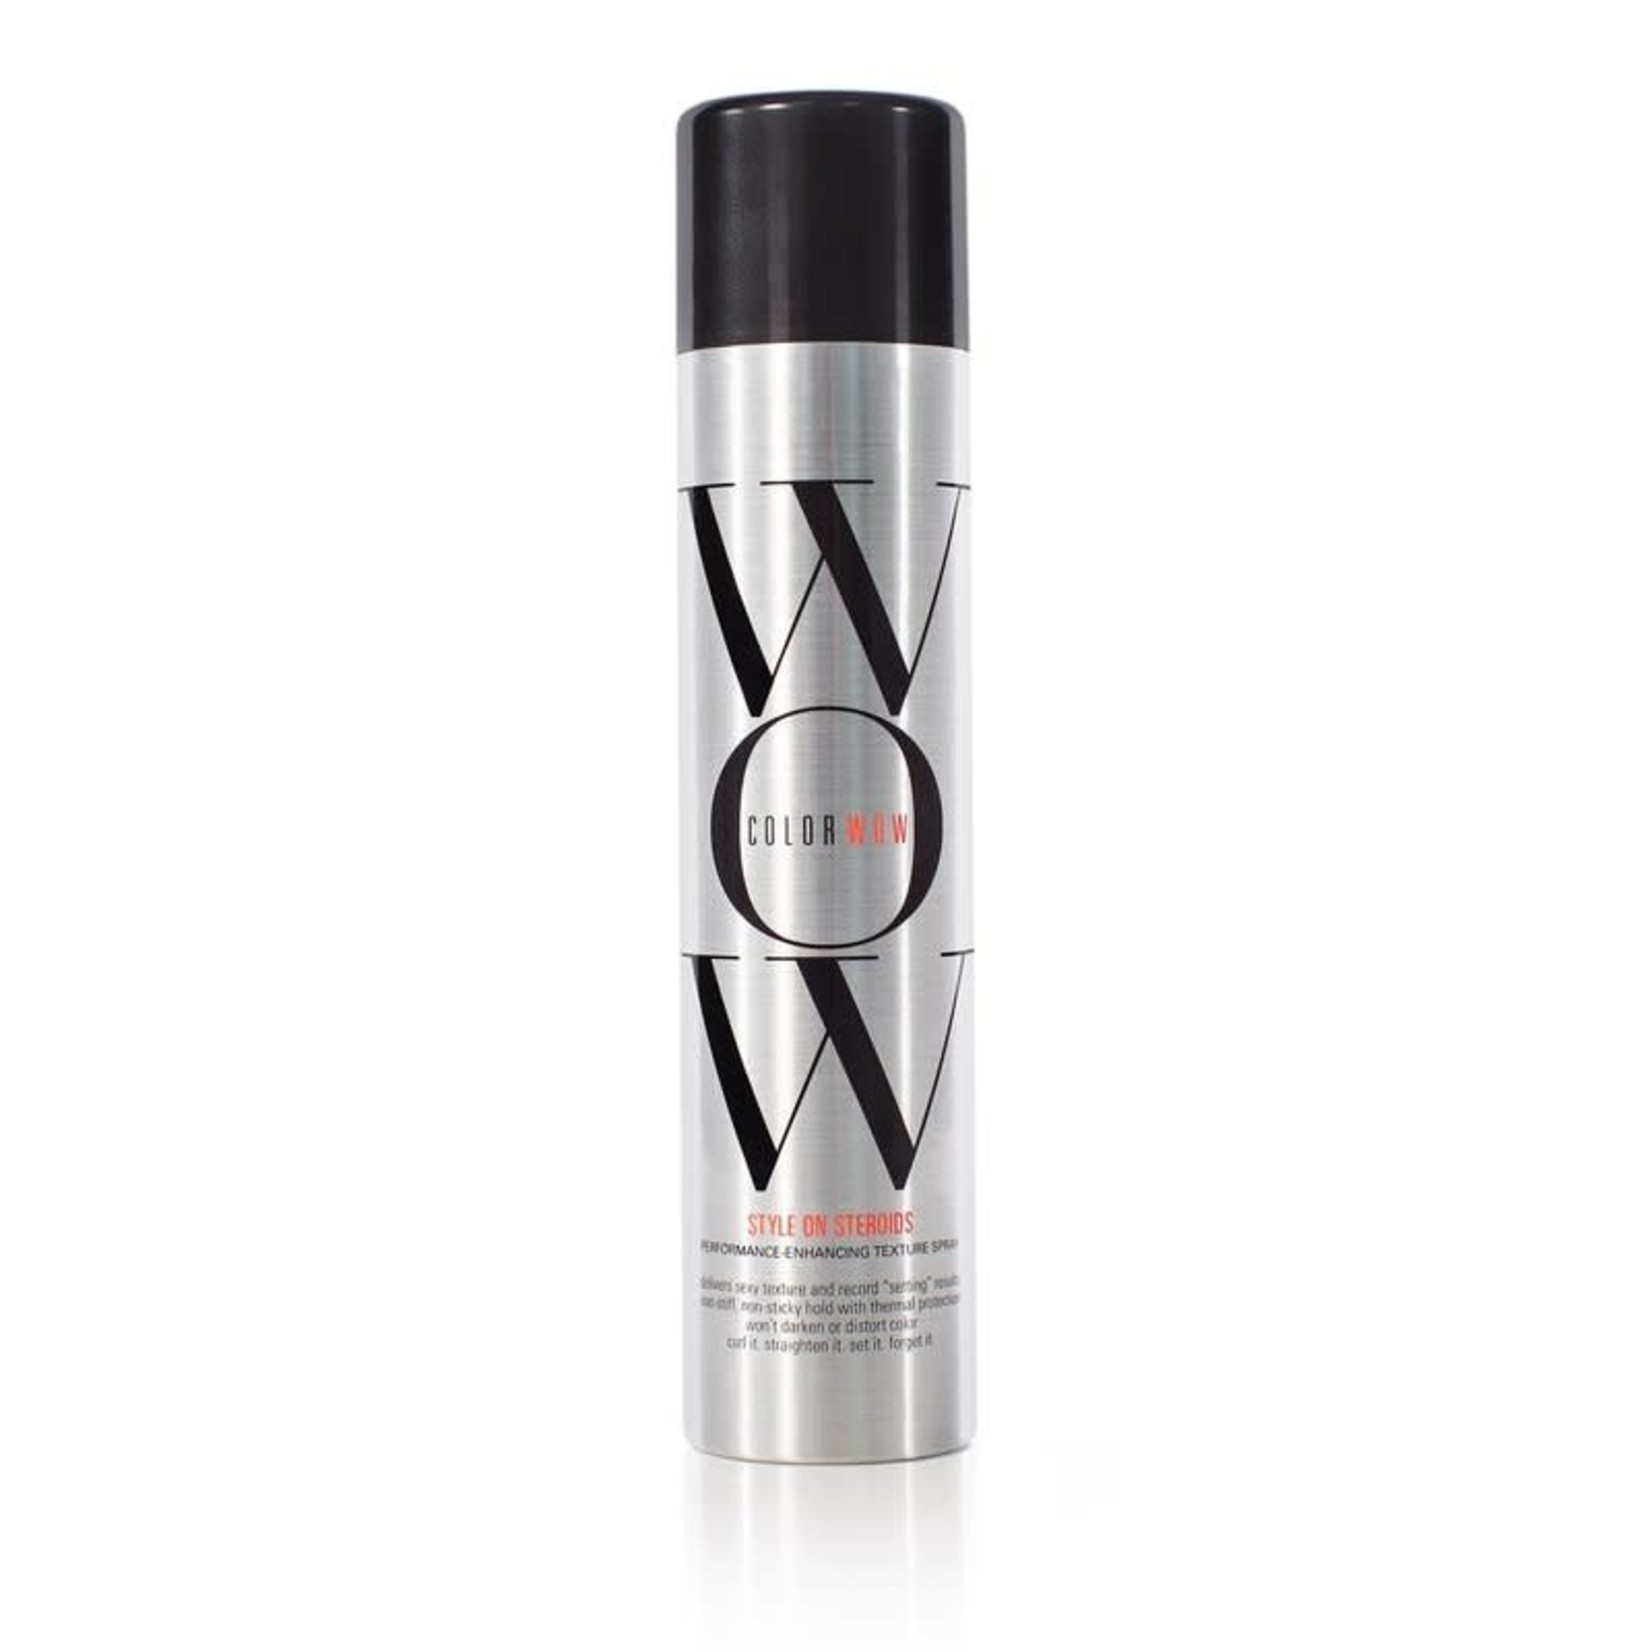 COLOR WOW STYLE ON STEROIDS Texturizing Spray